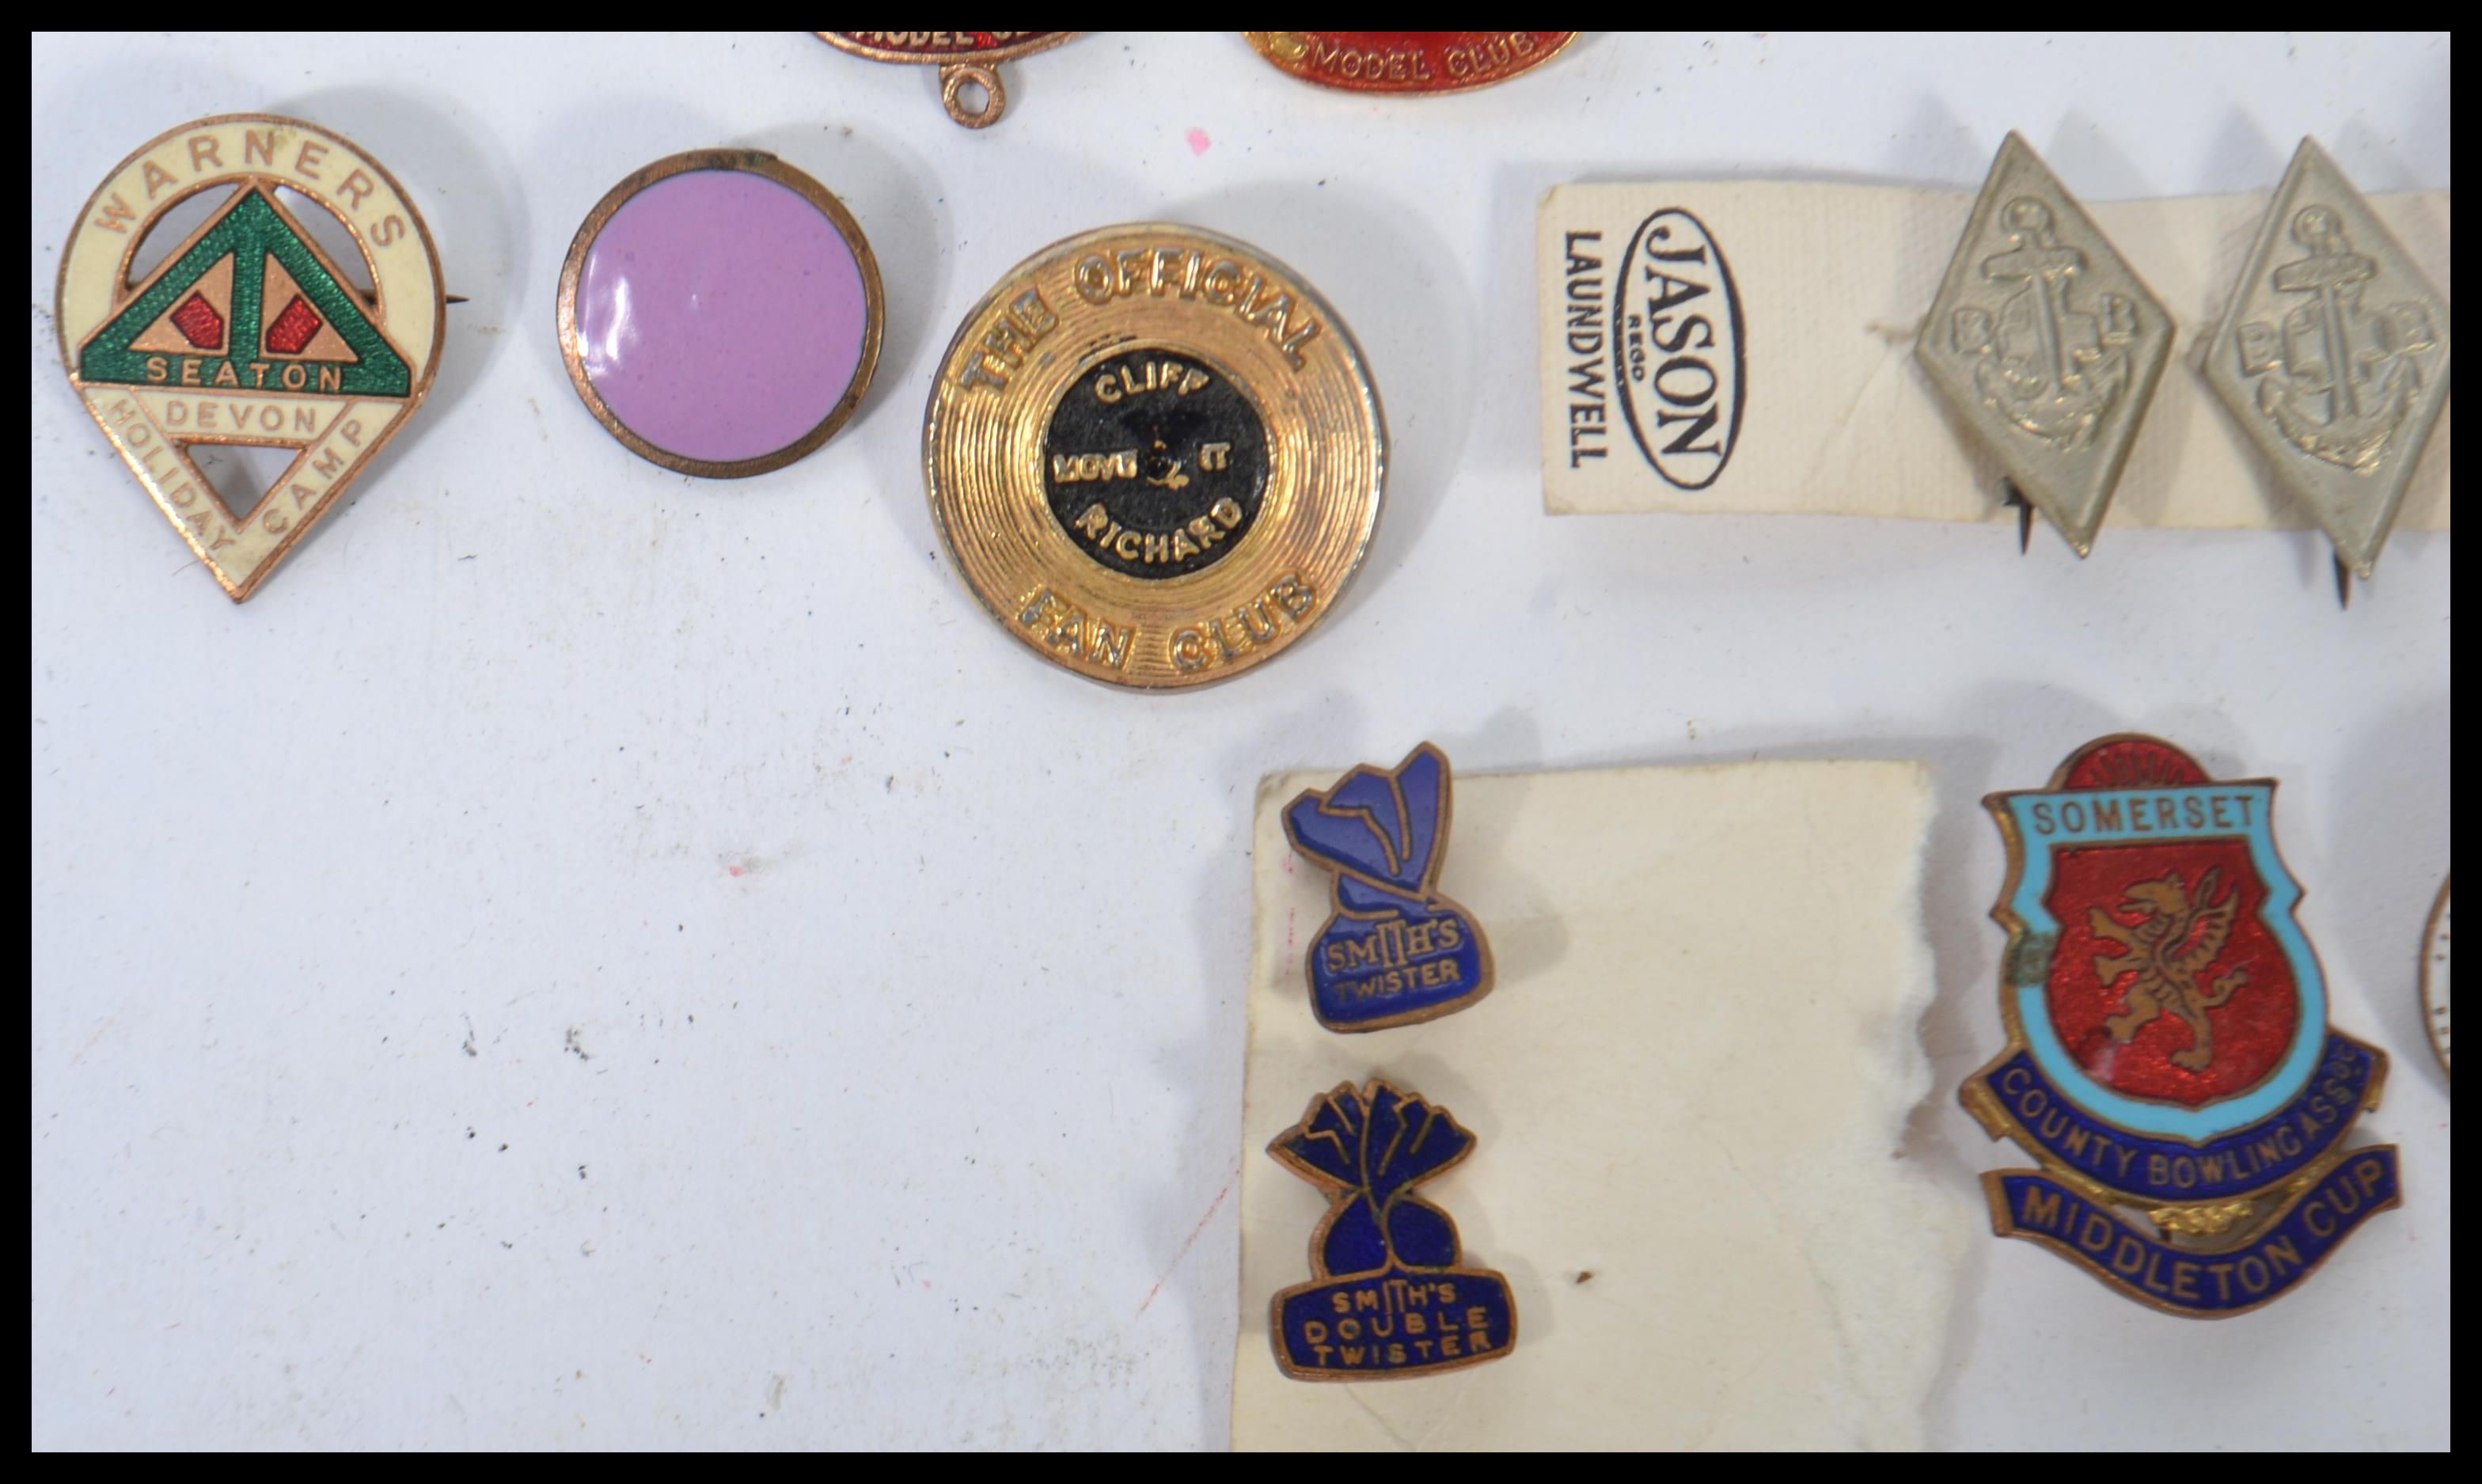 A good collection of vintage Enamel pin badges dating from the first half of the 20th century to - Image 4 of 10